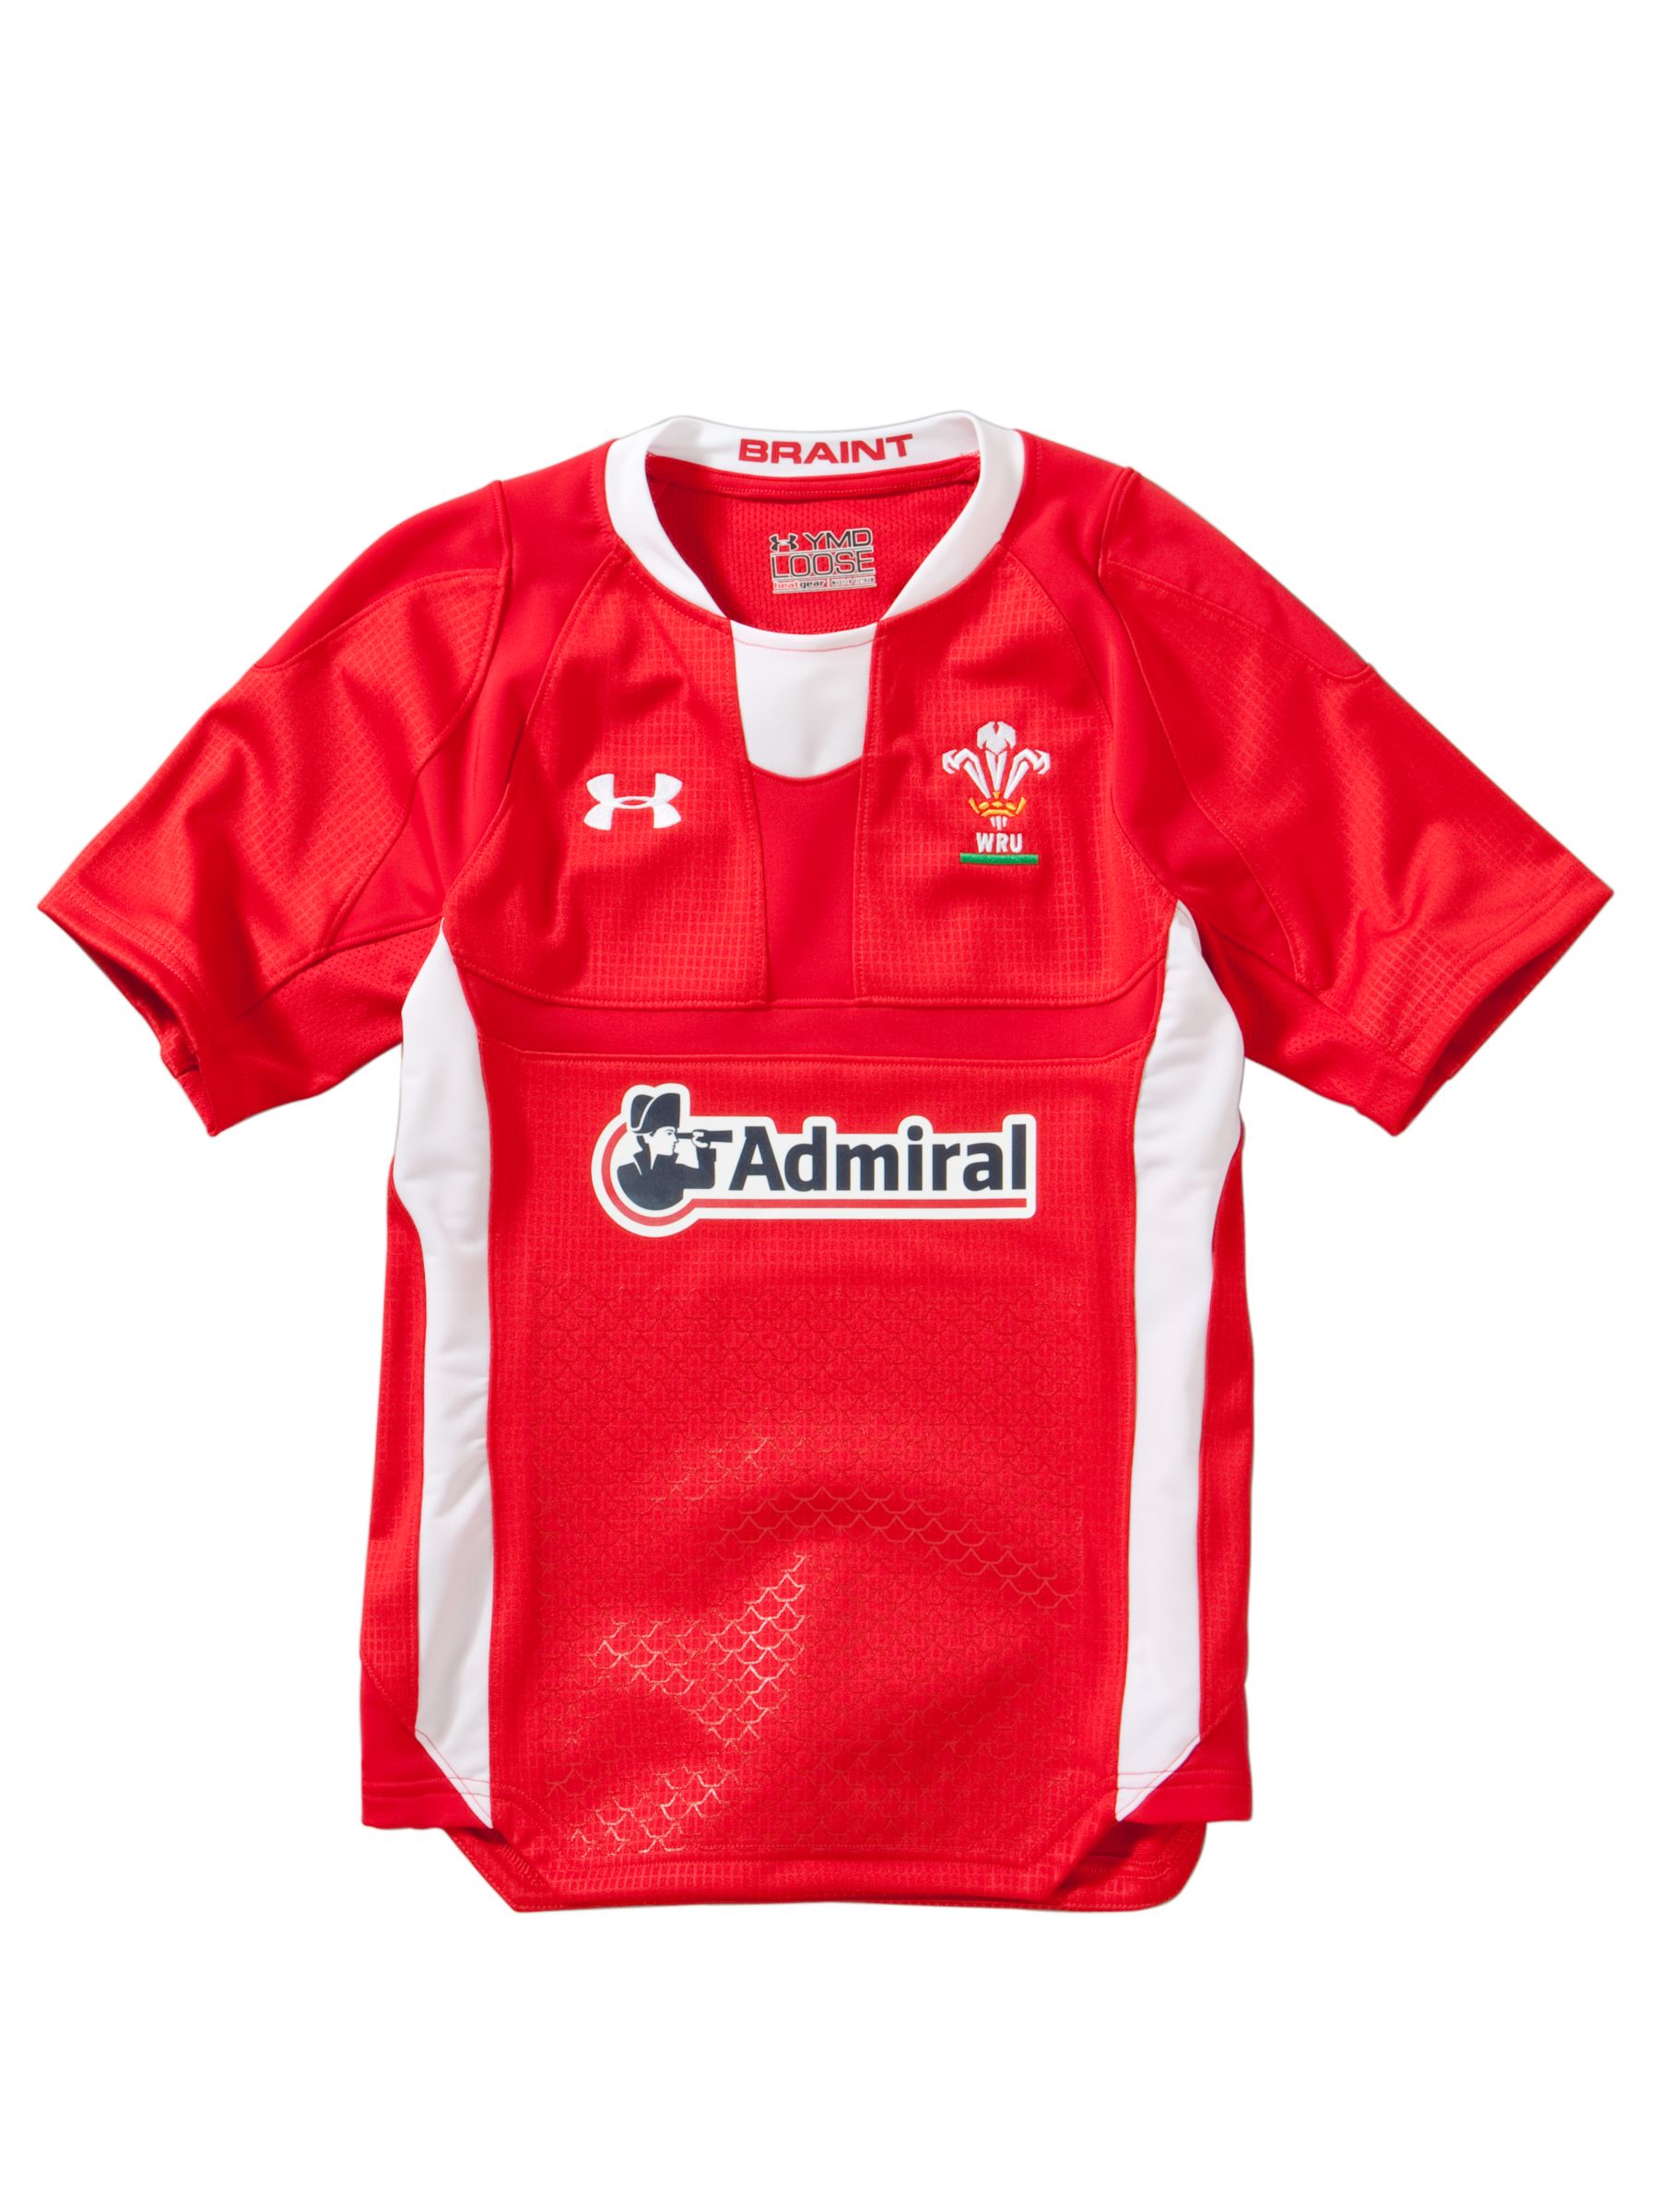 Youth WRU Home Rugby Shirt, Red